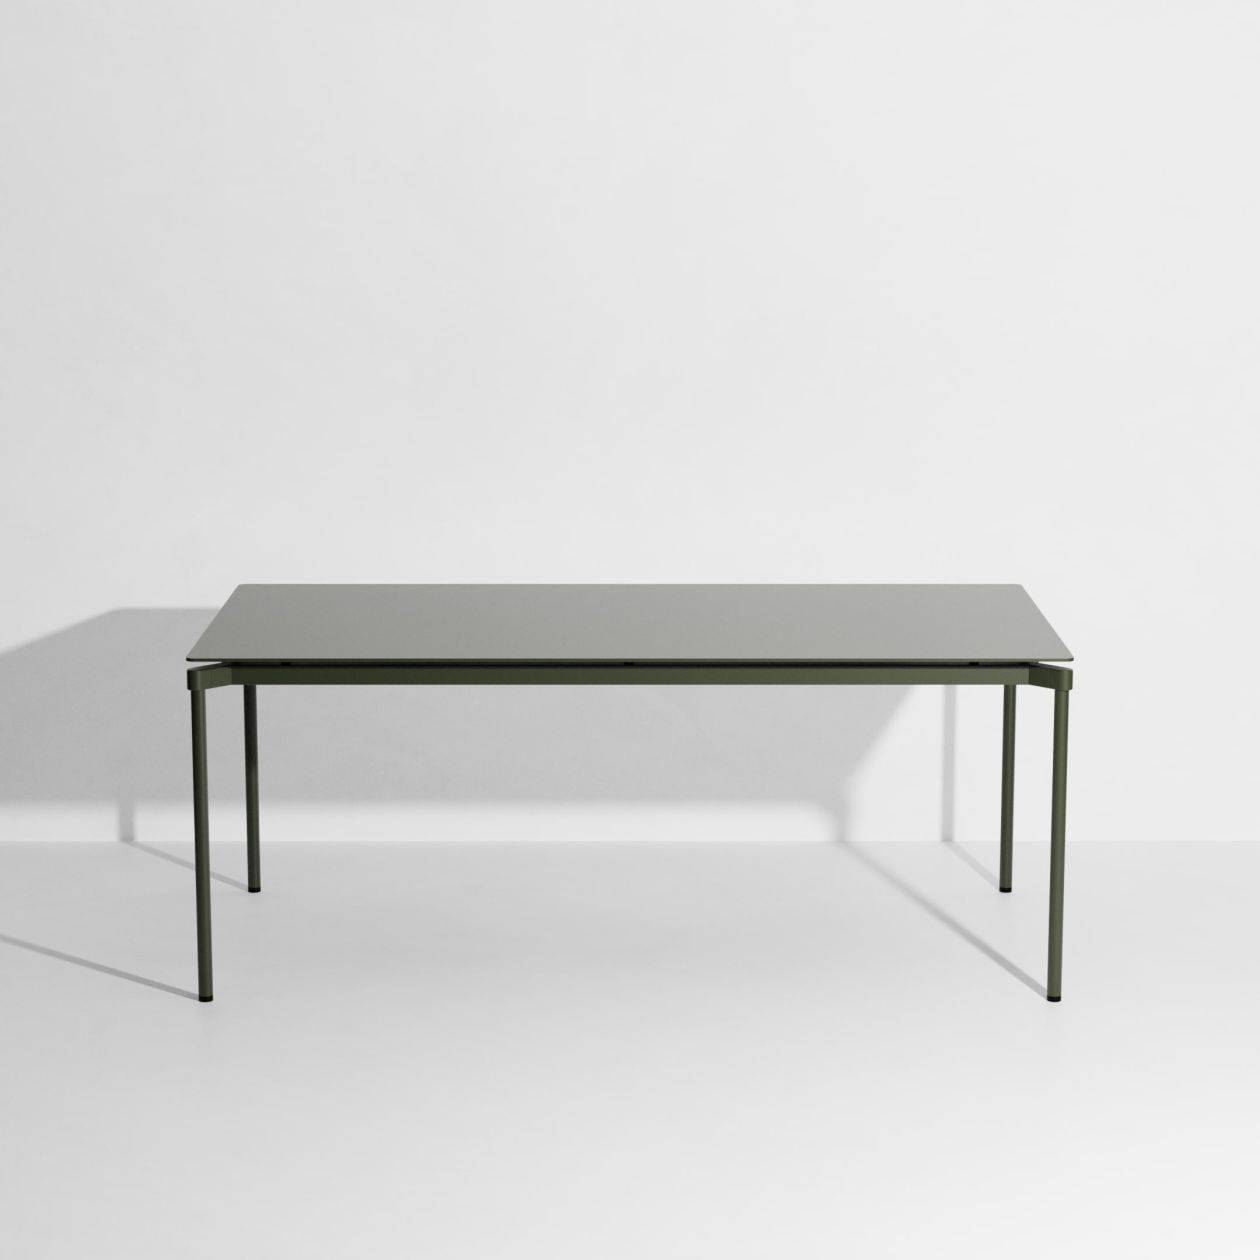 Fromme Rectangular Table - Glass green